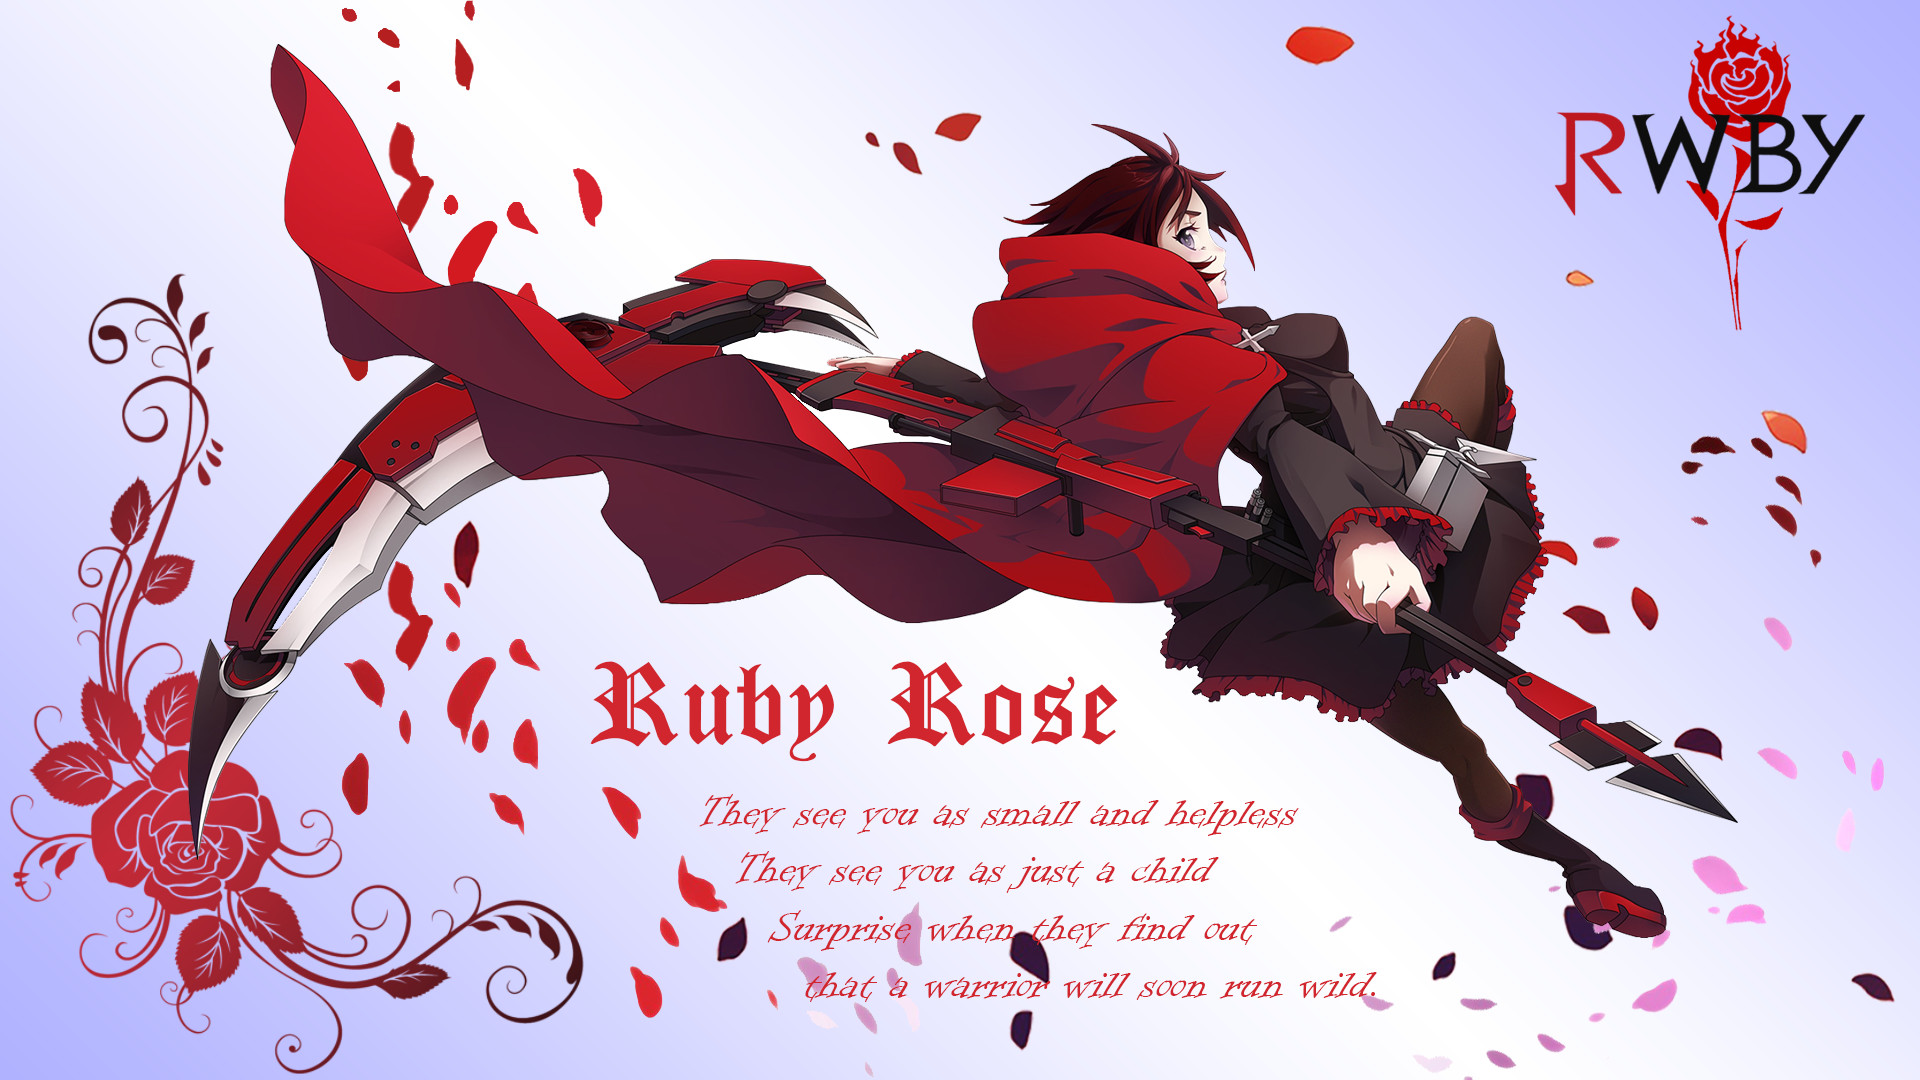 1920x1080 So I made this Ruby wallpaper... I hope you like it.